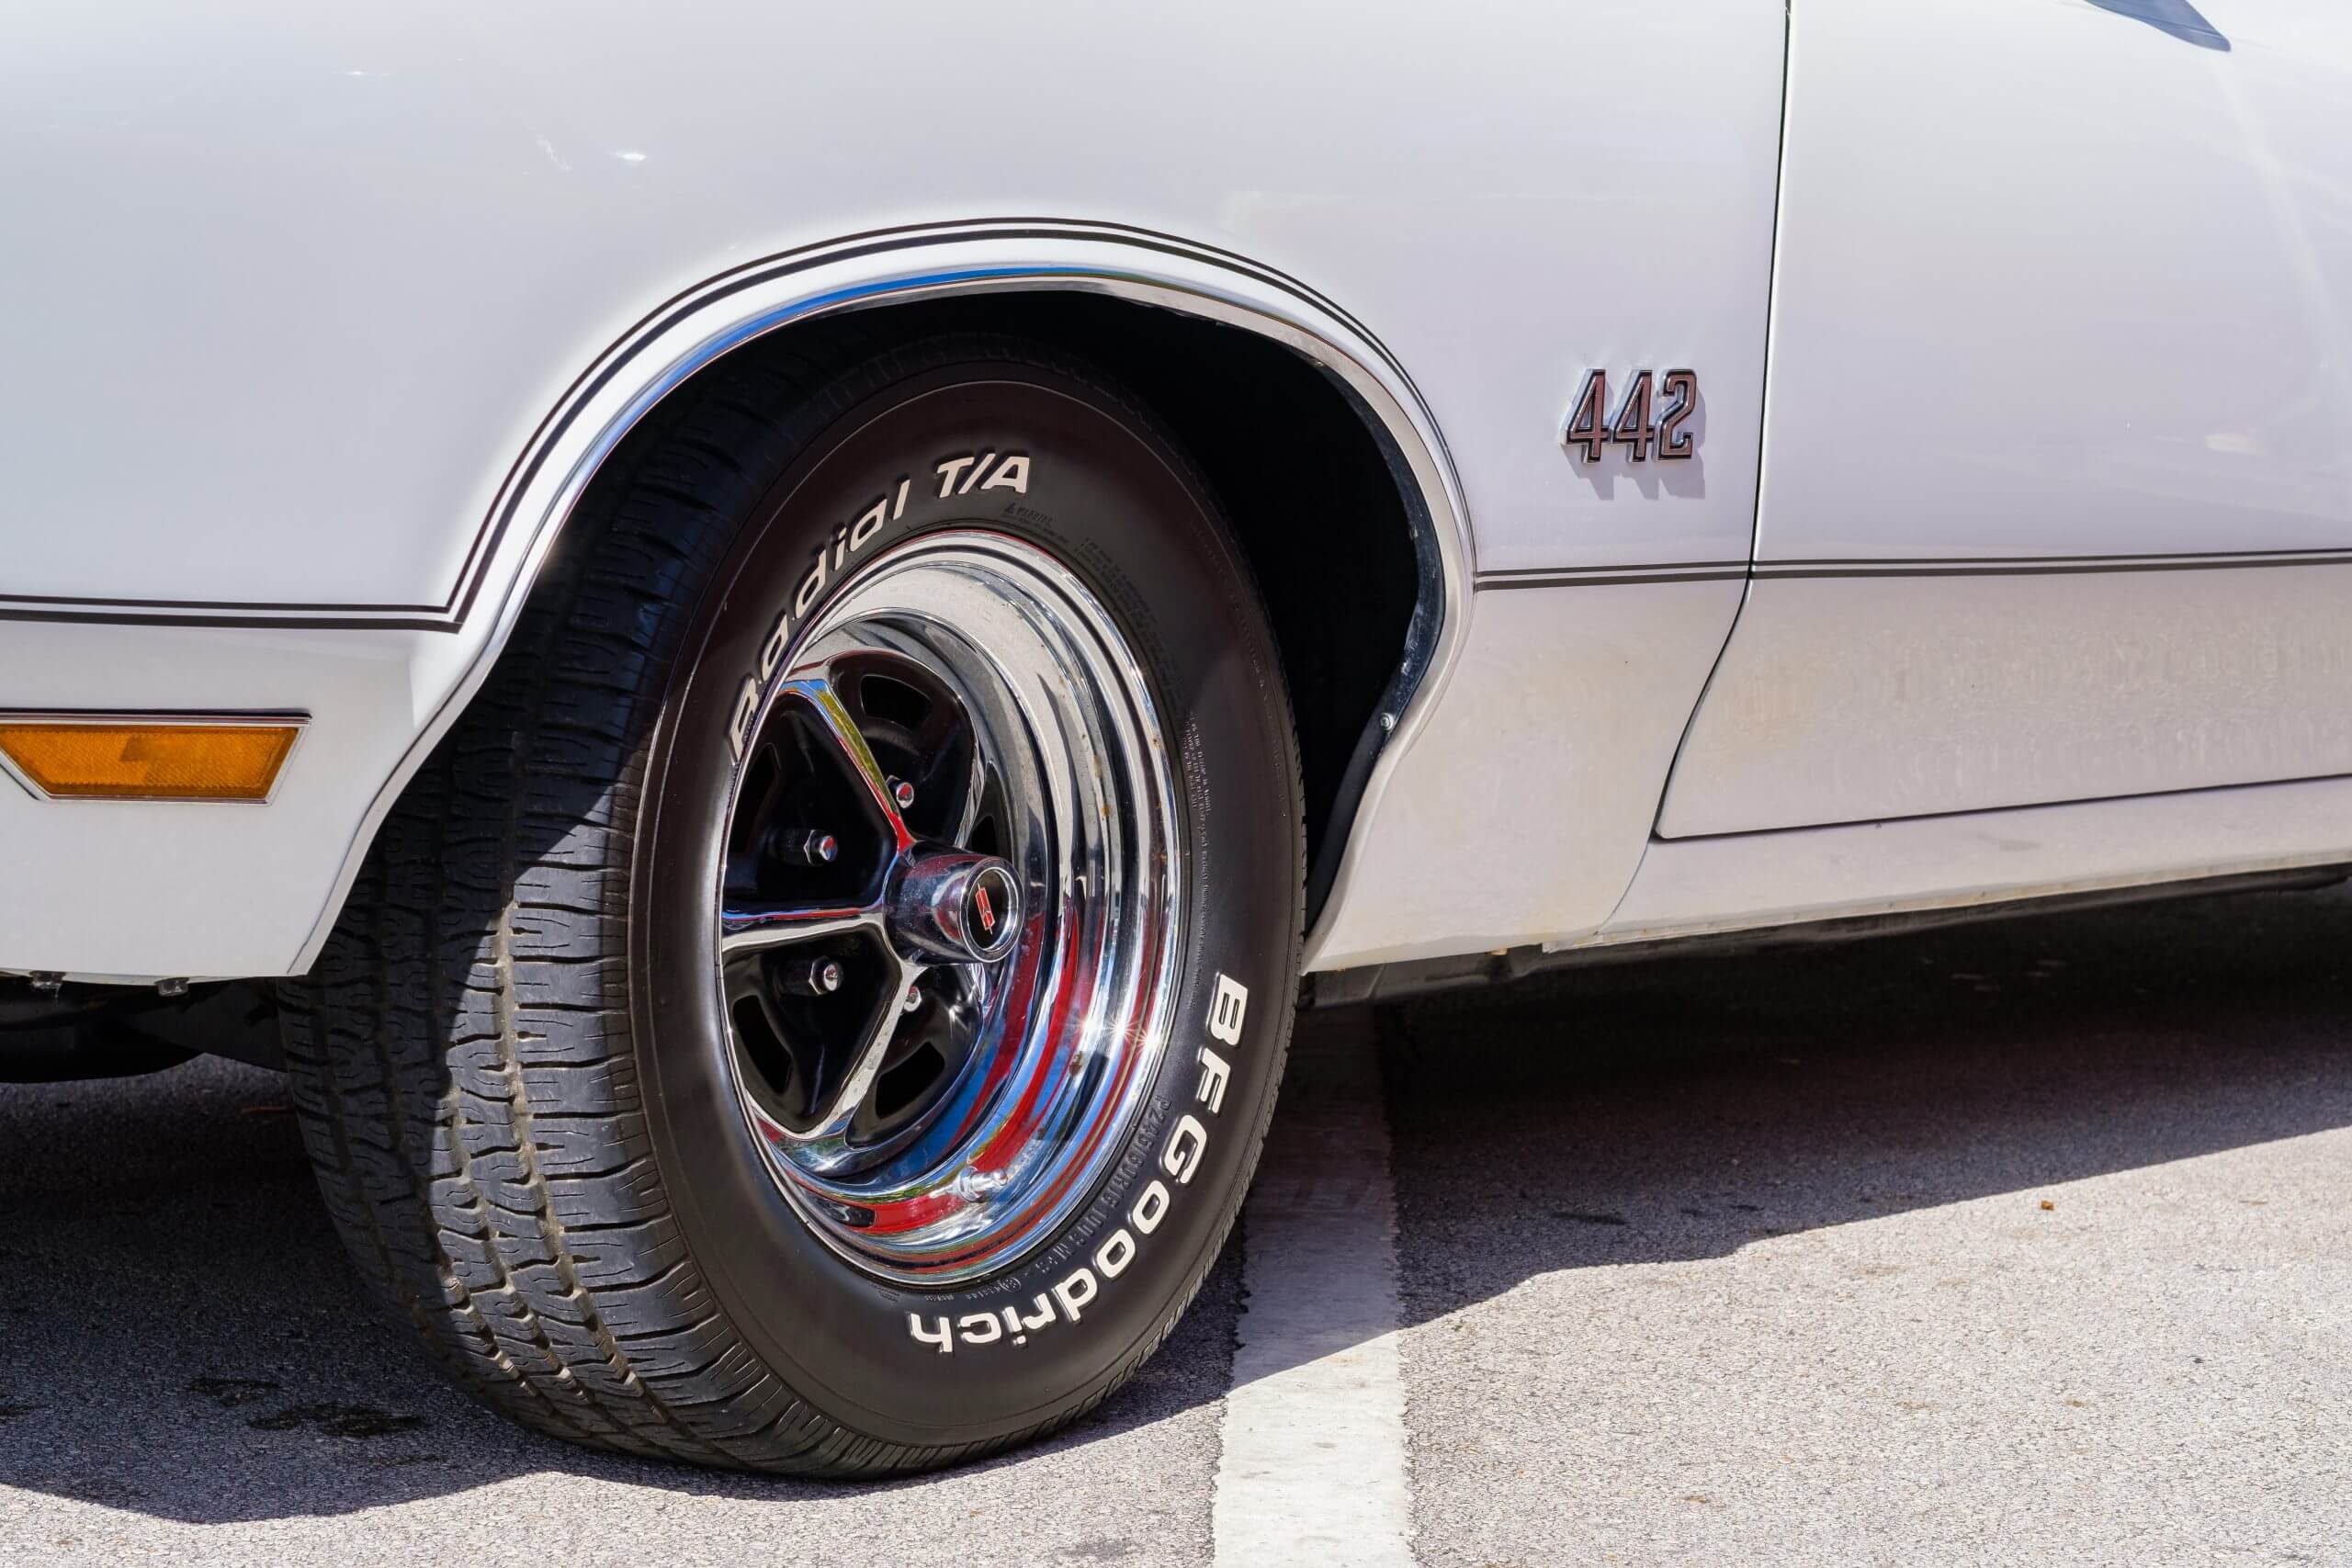 Miami, Florida USA - March 5, 2017: Close up view of a beautifully restored General Motors Cutlass Oldsmobile 442 at a public car show.